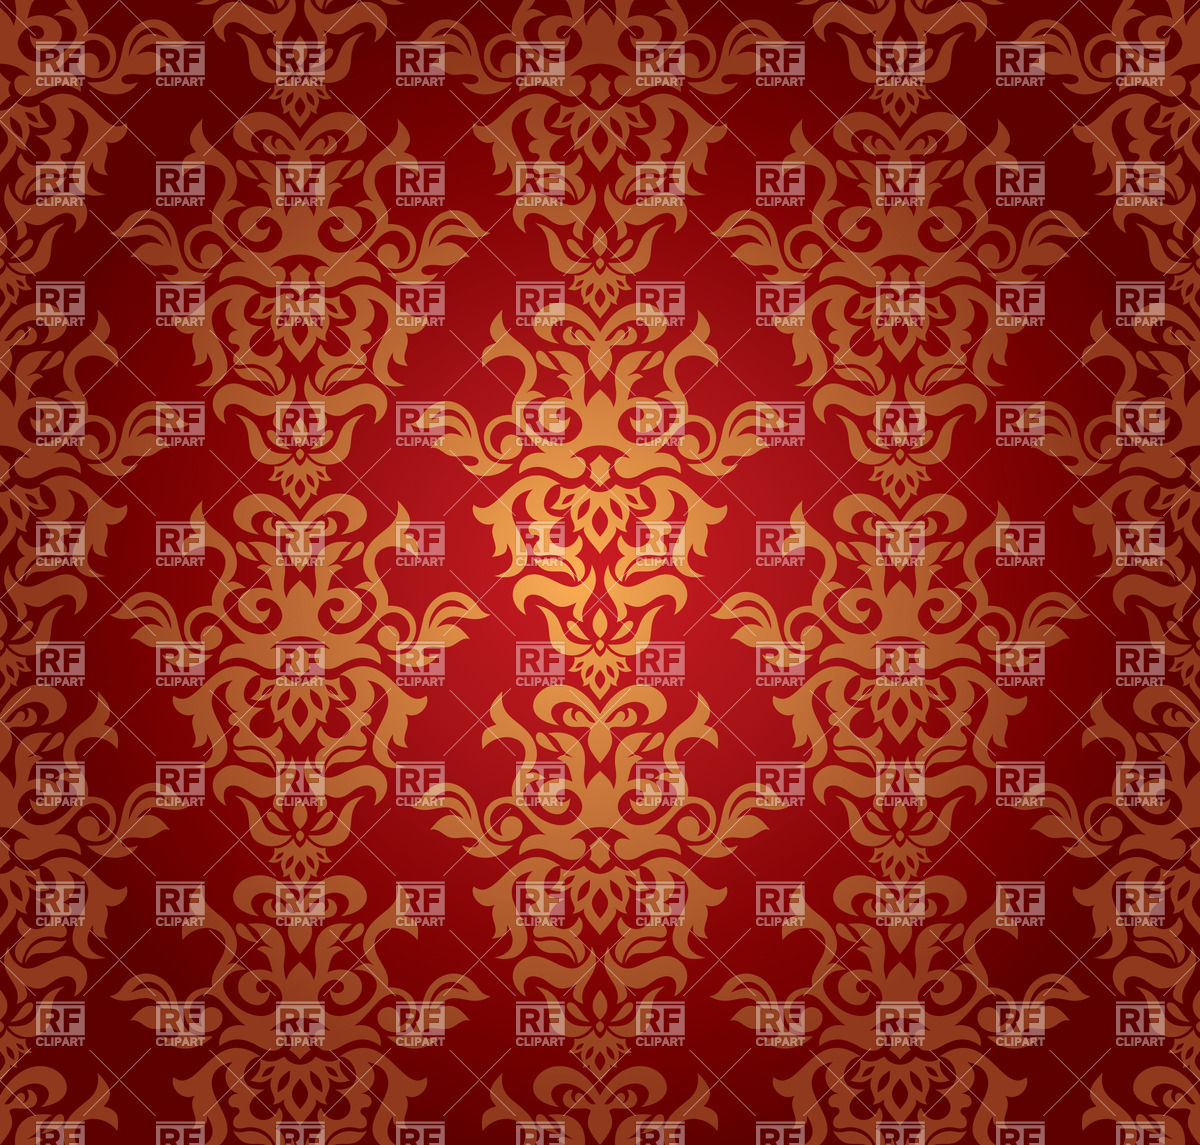 Abstract Red With Gold Damask Wallpaper Royalty Vector